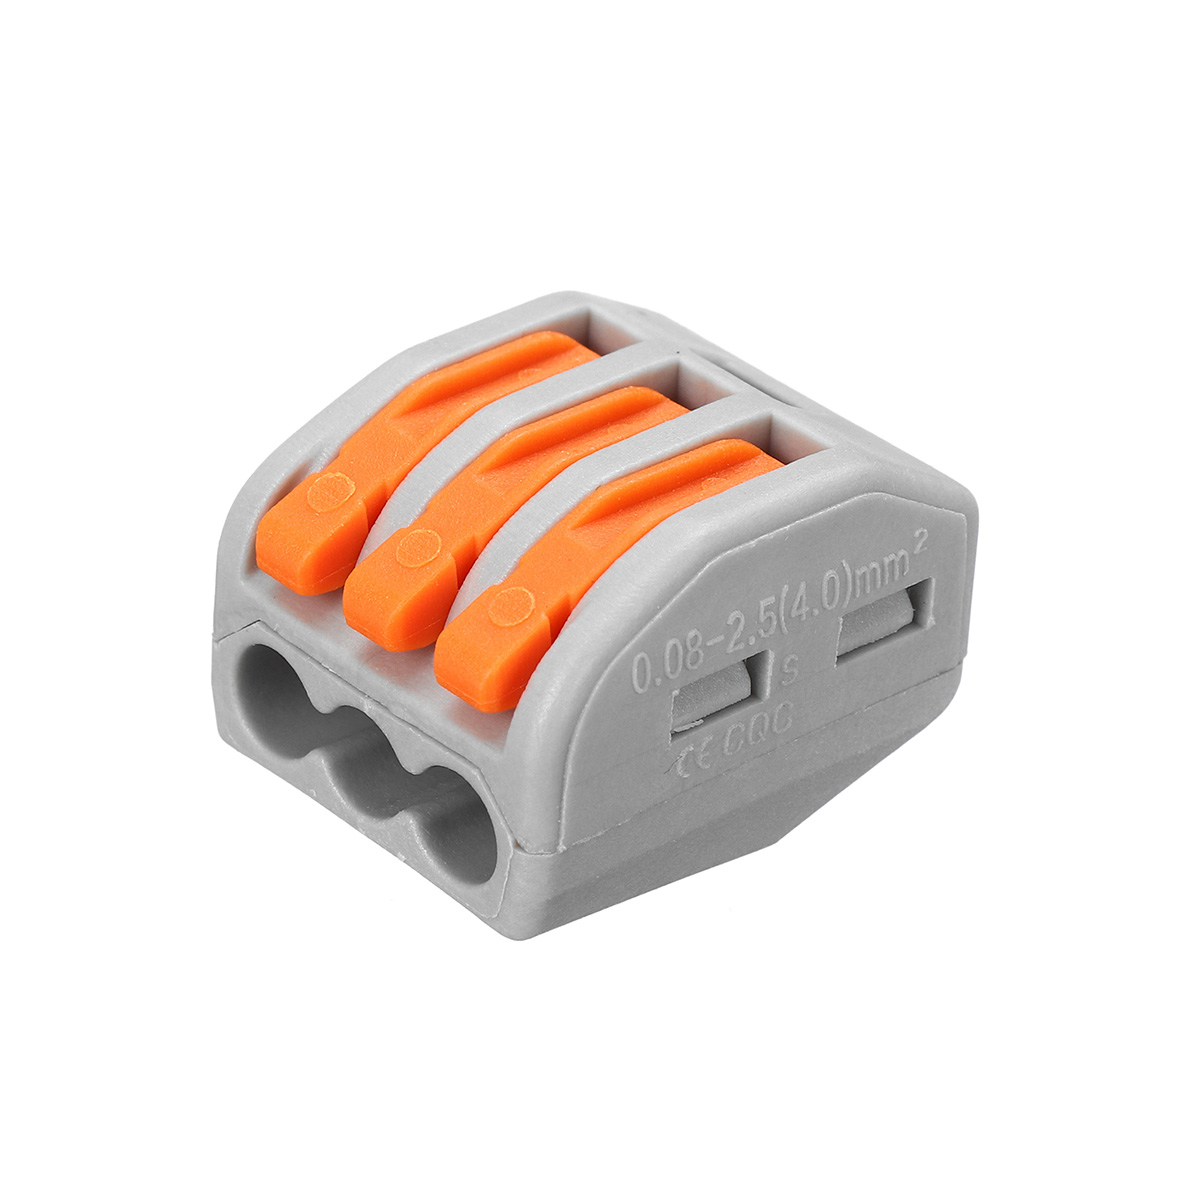 100PcsSet-Terminal-Block-Reusable-Electric-Cable-Wire-Connector-235-Pin-1487164-8